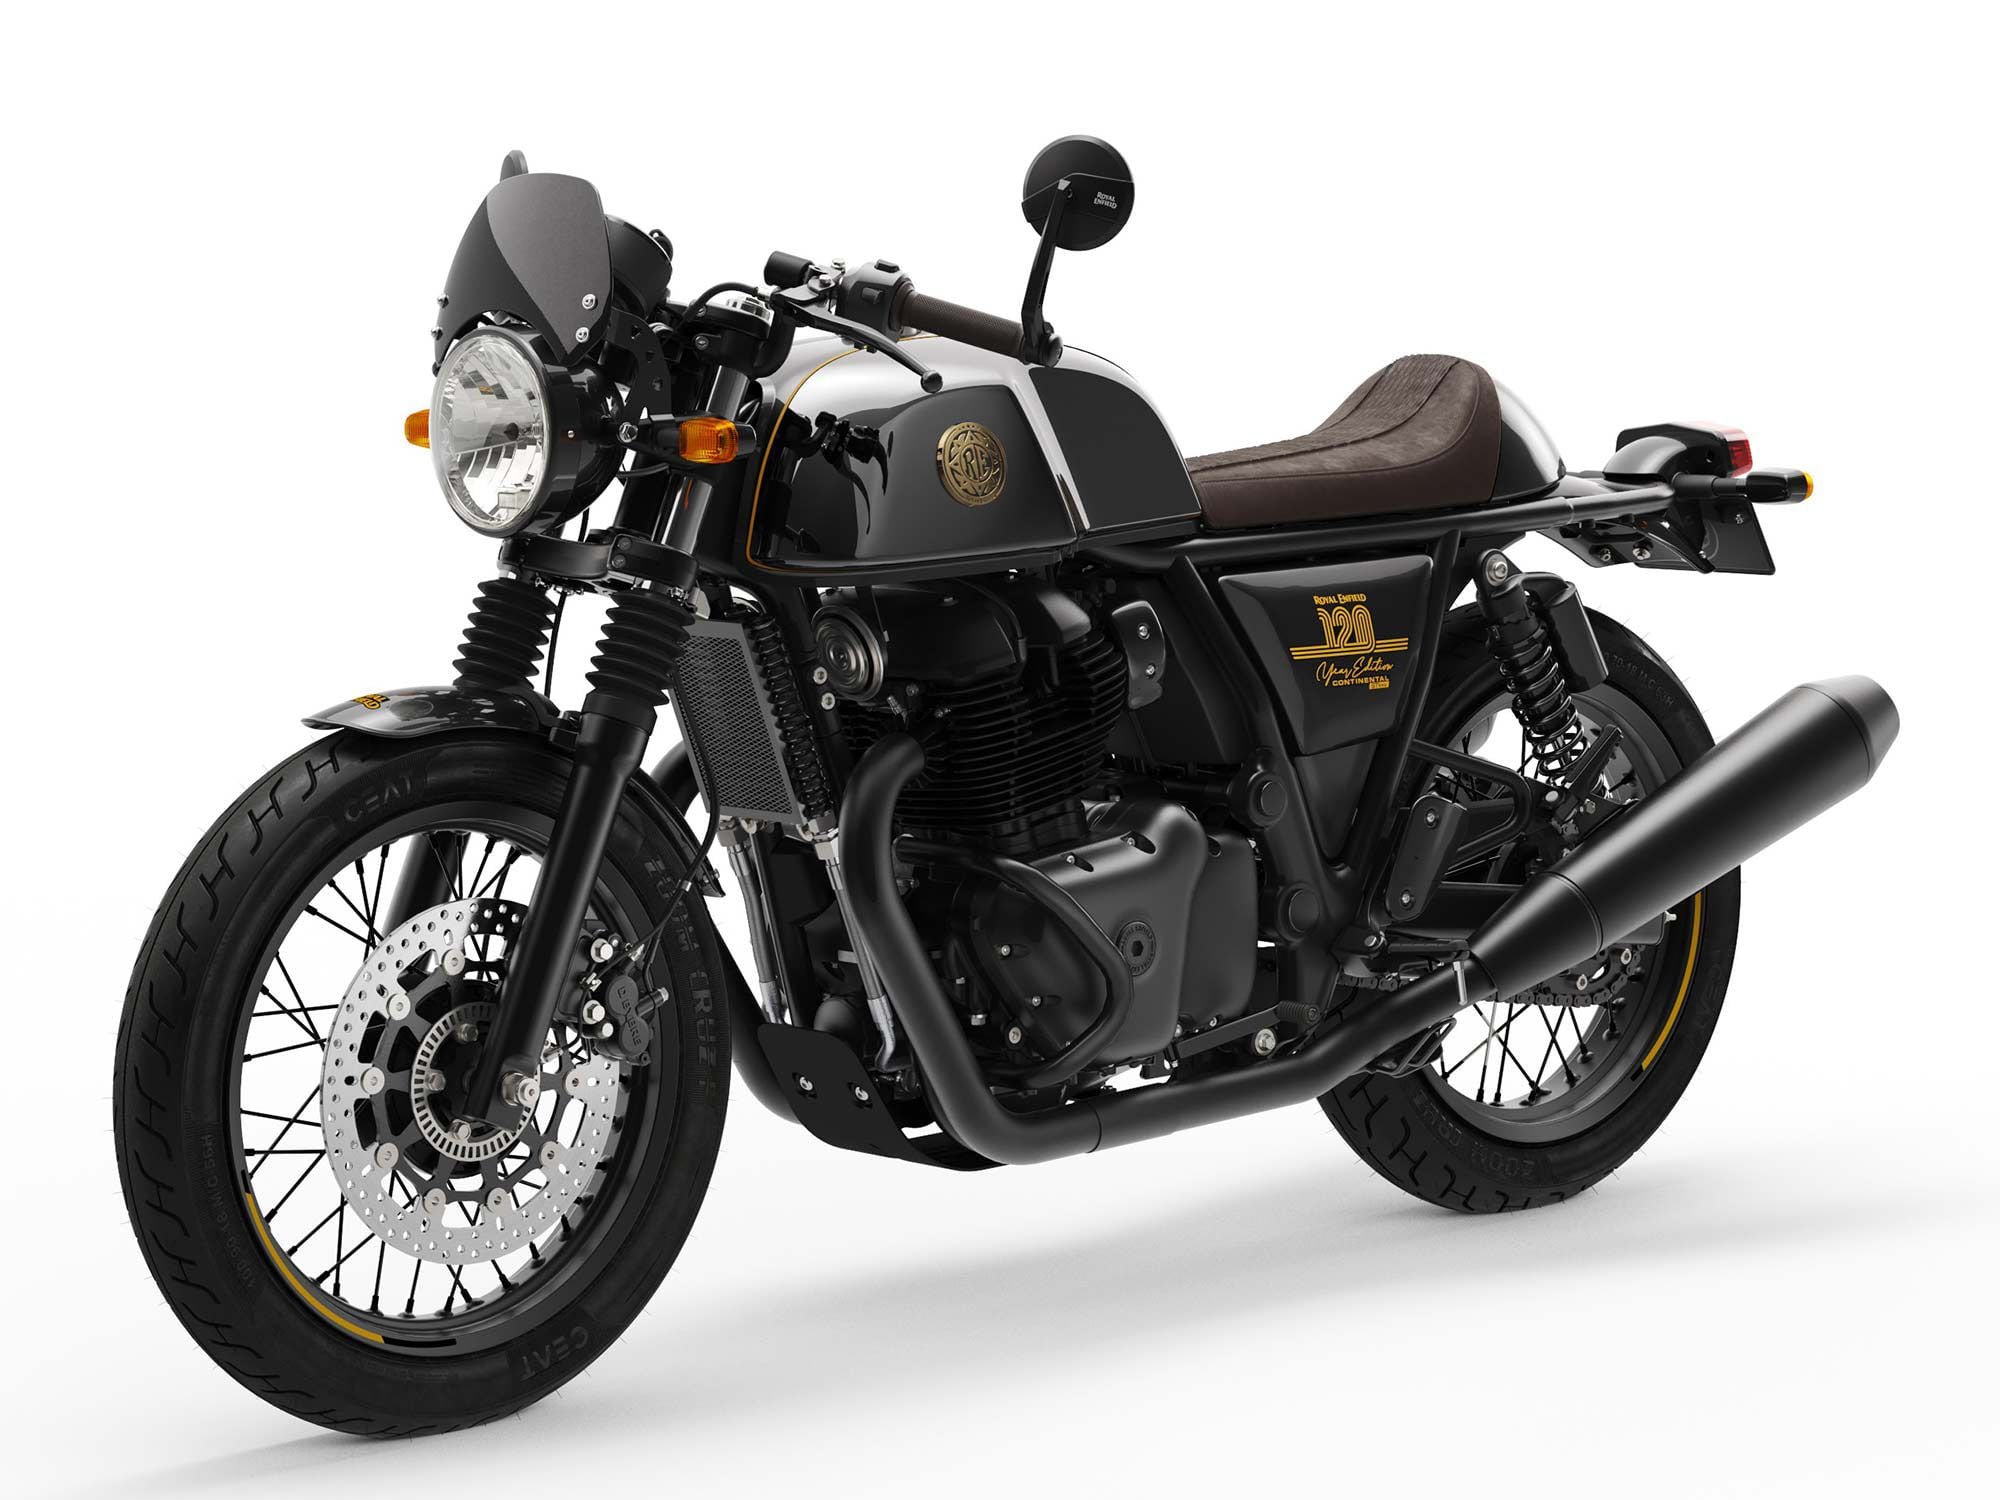 Both the Continental GT 650 and Interceptor 650 will also feature blacked-out components, a first for Royal Enfield.